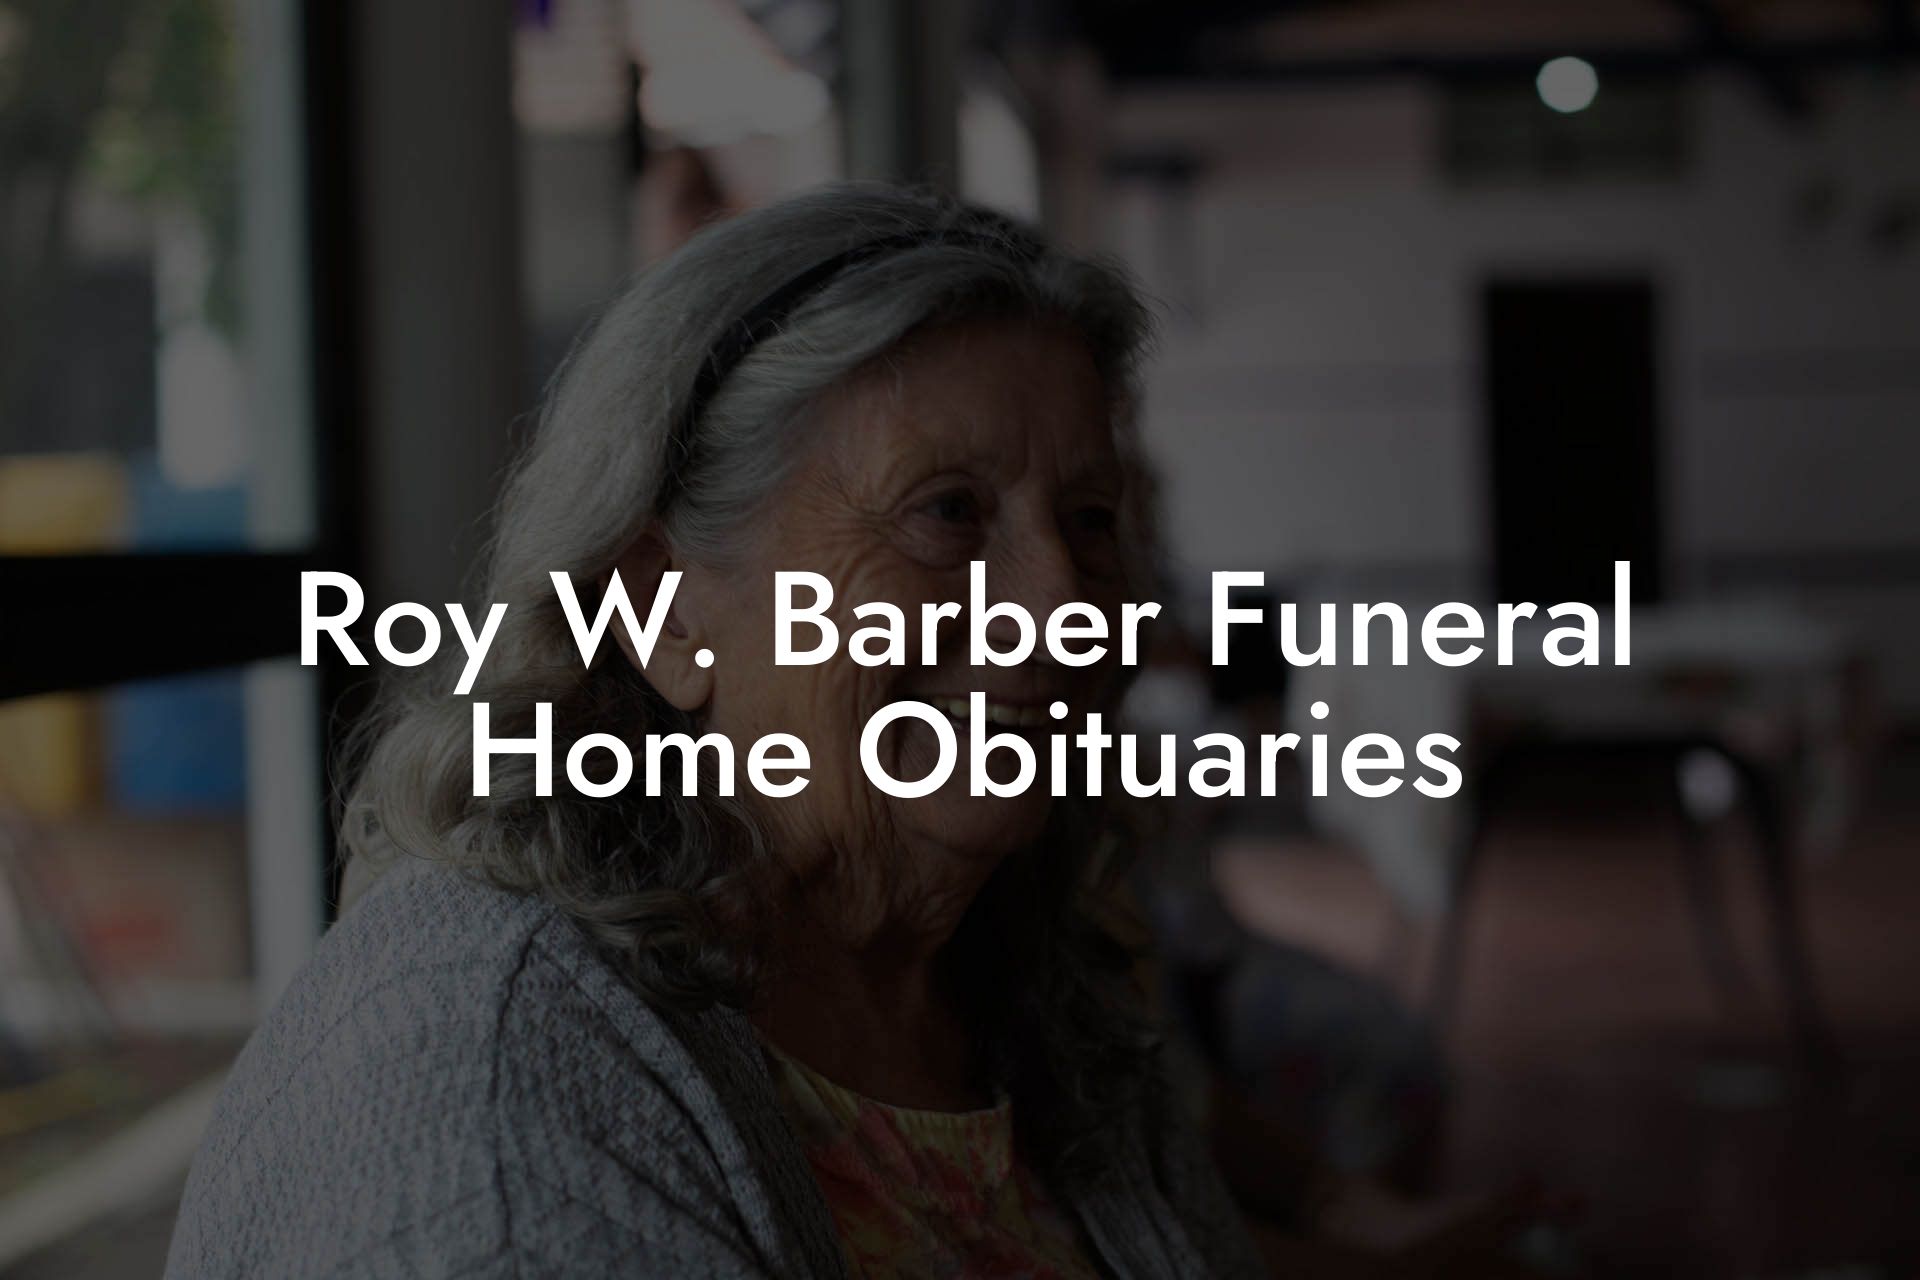 Roy W. Barber Funeral Home Obituaries